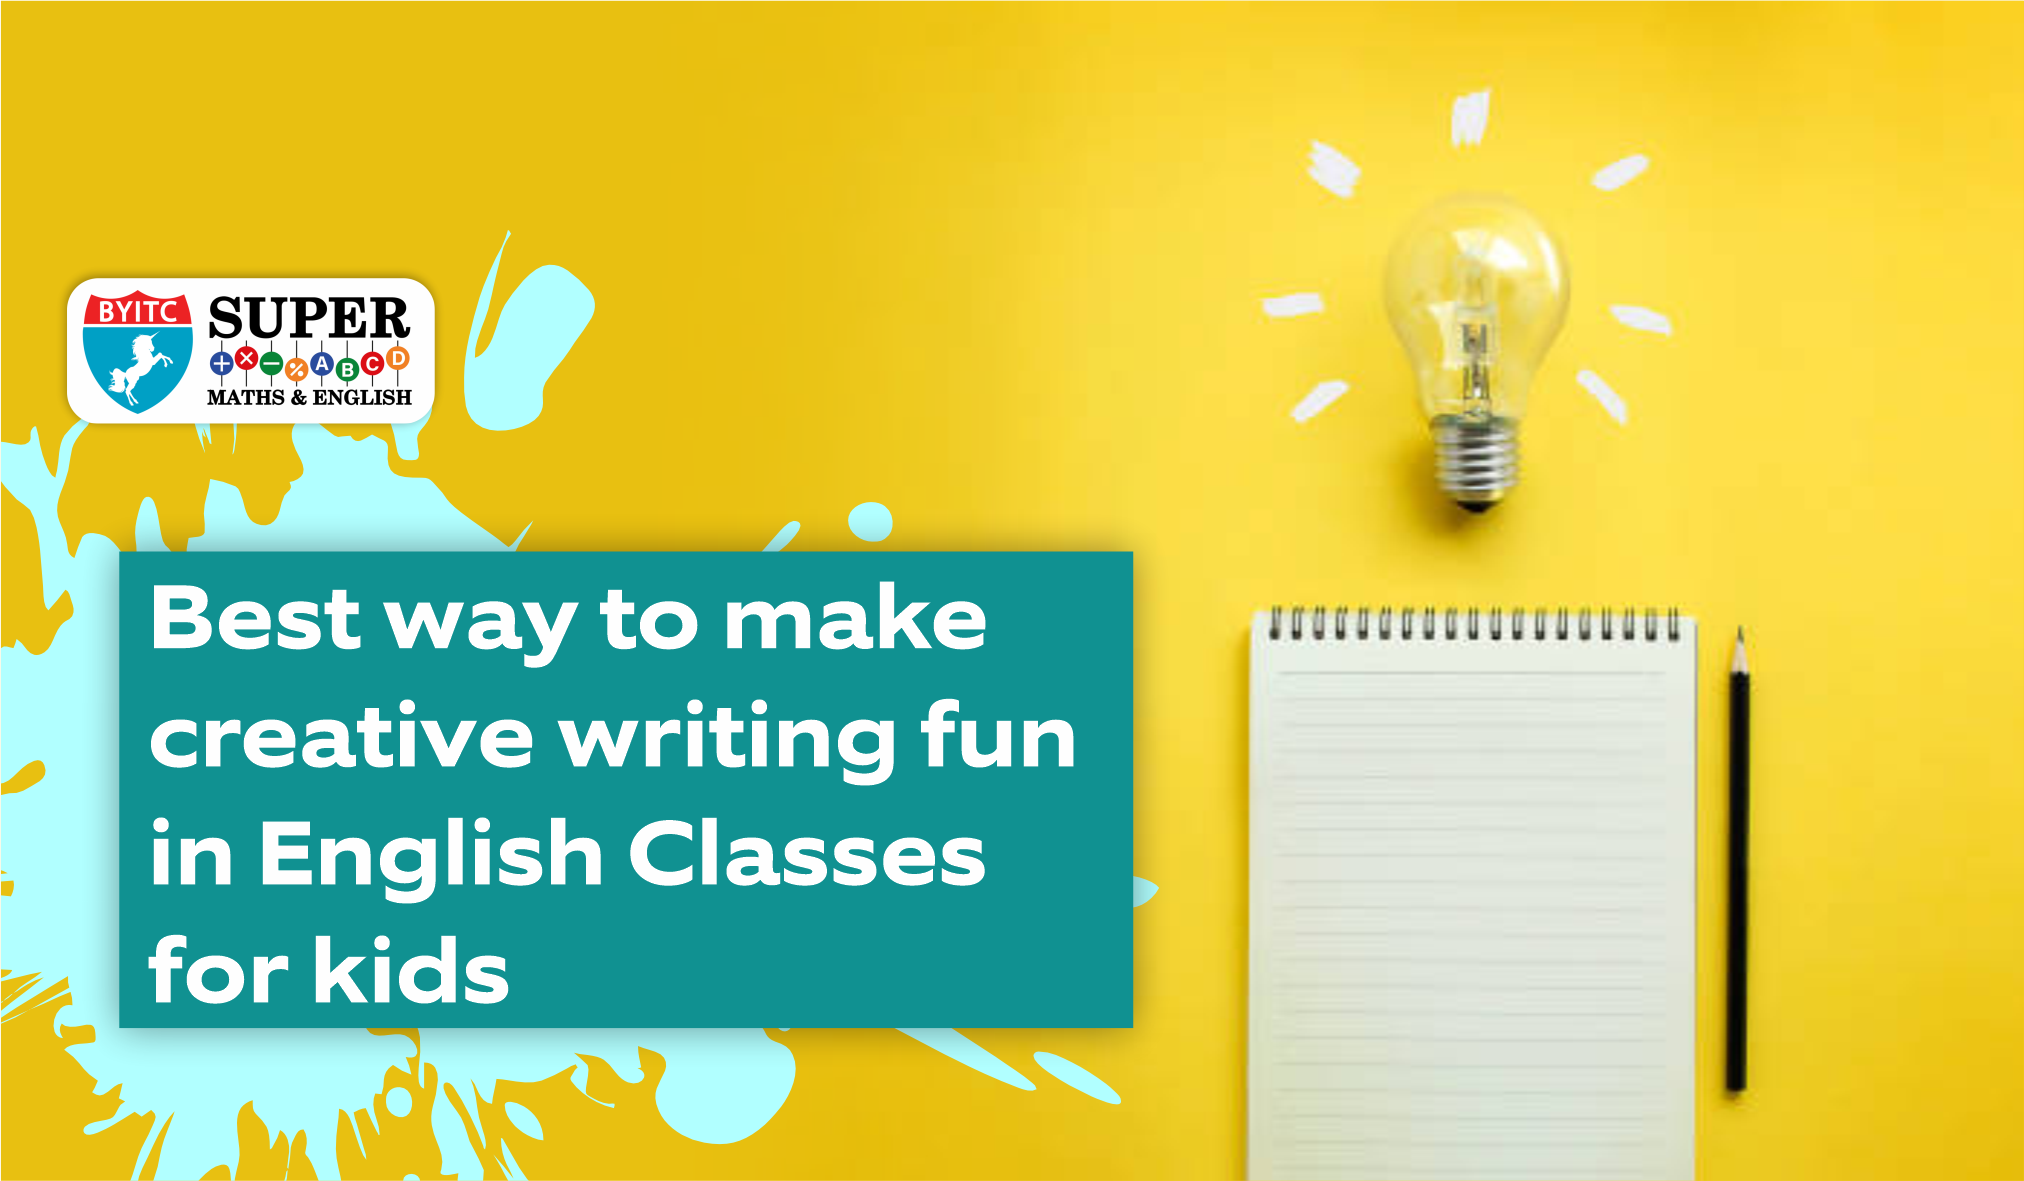 Best Way to Make Creative Writing Fun in English Classes for Kids